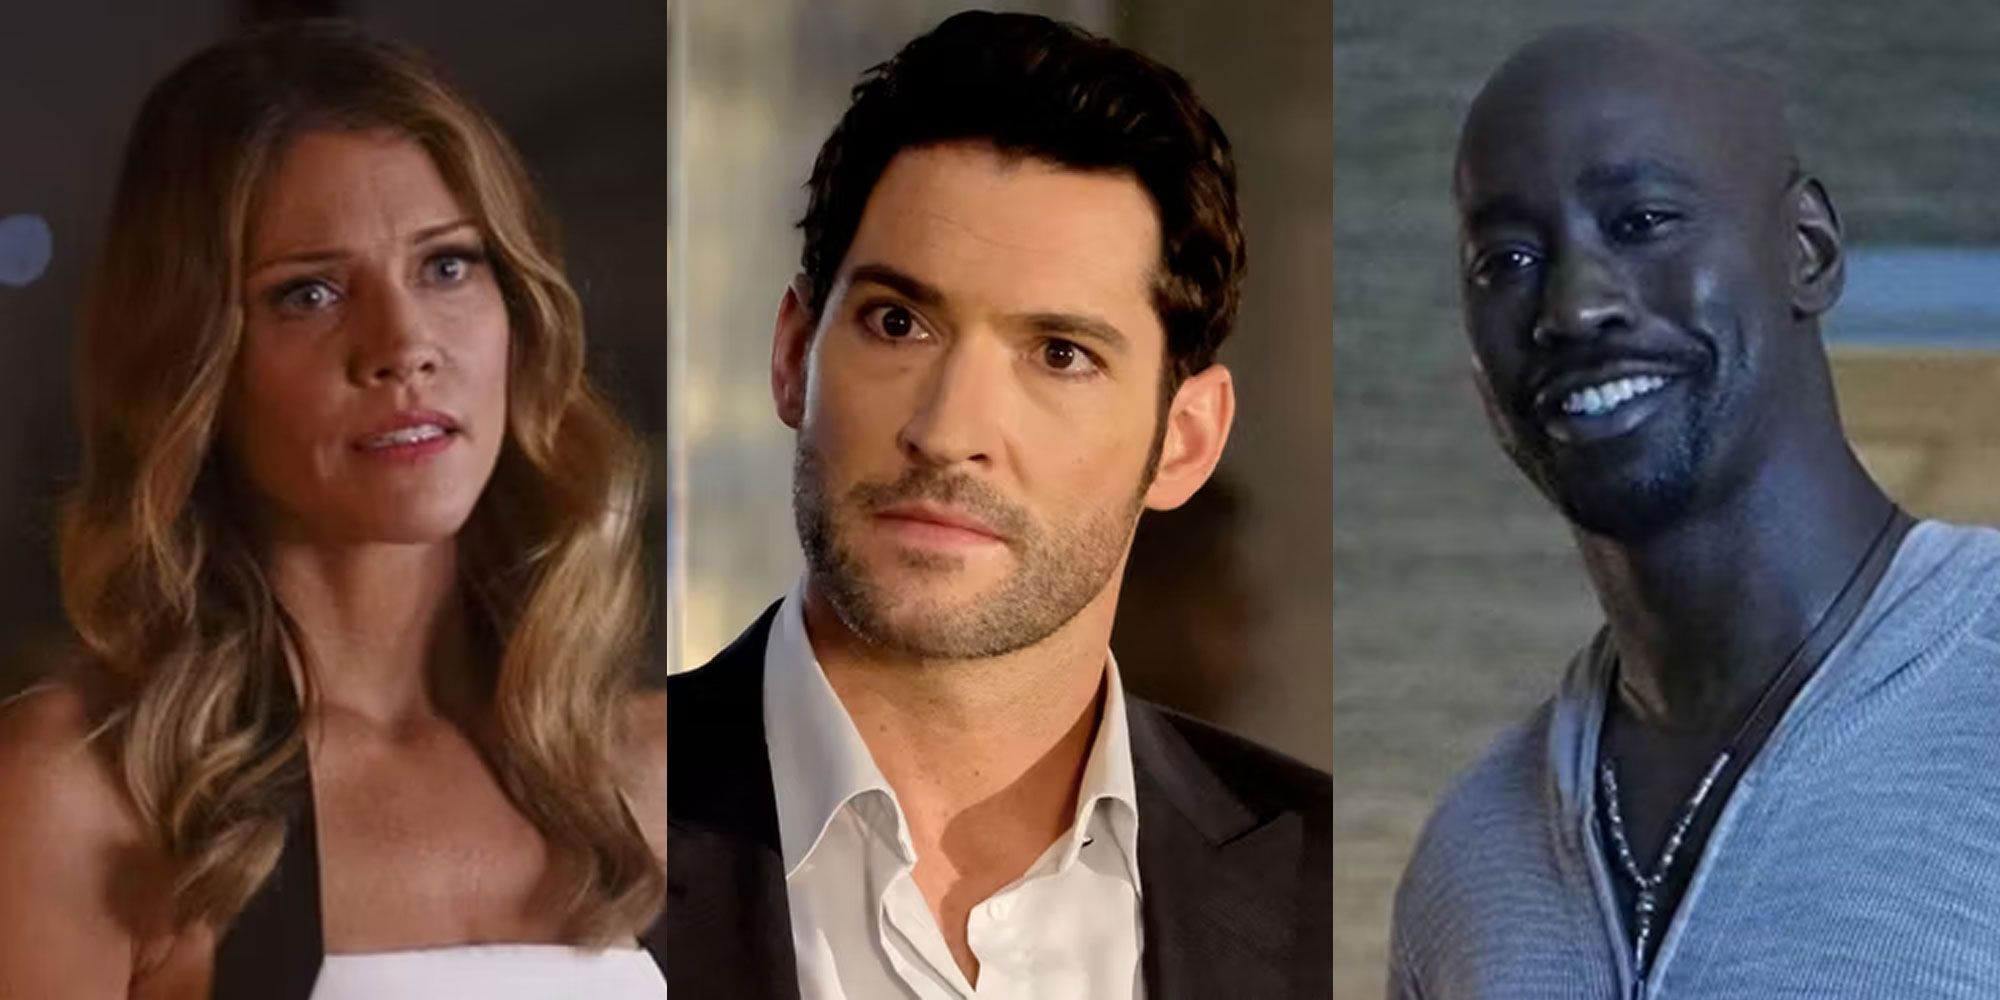 A split image features Charlotte, Lucifer, and Amenadiel in the Lucifer series